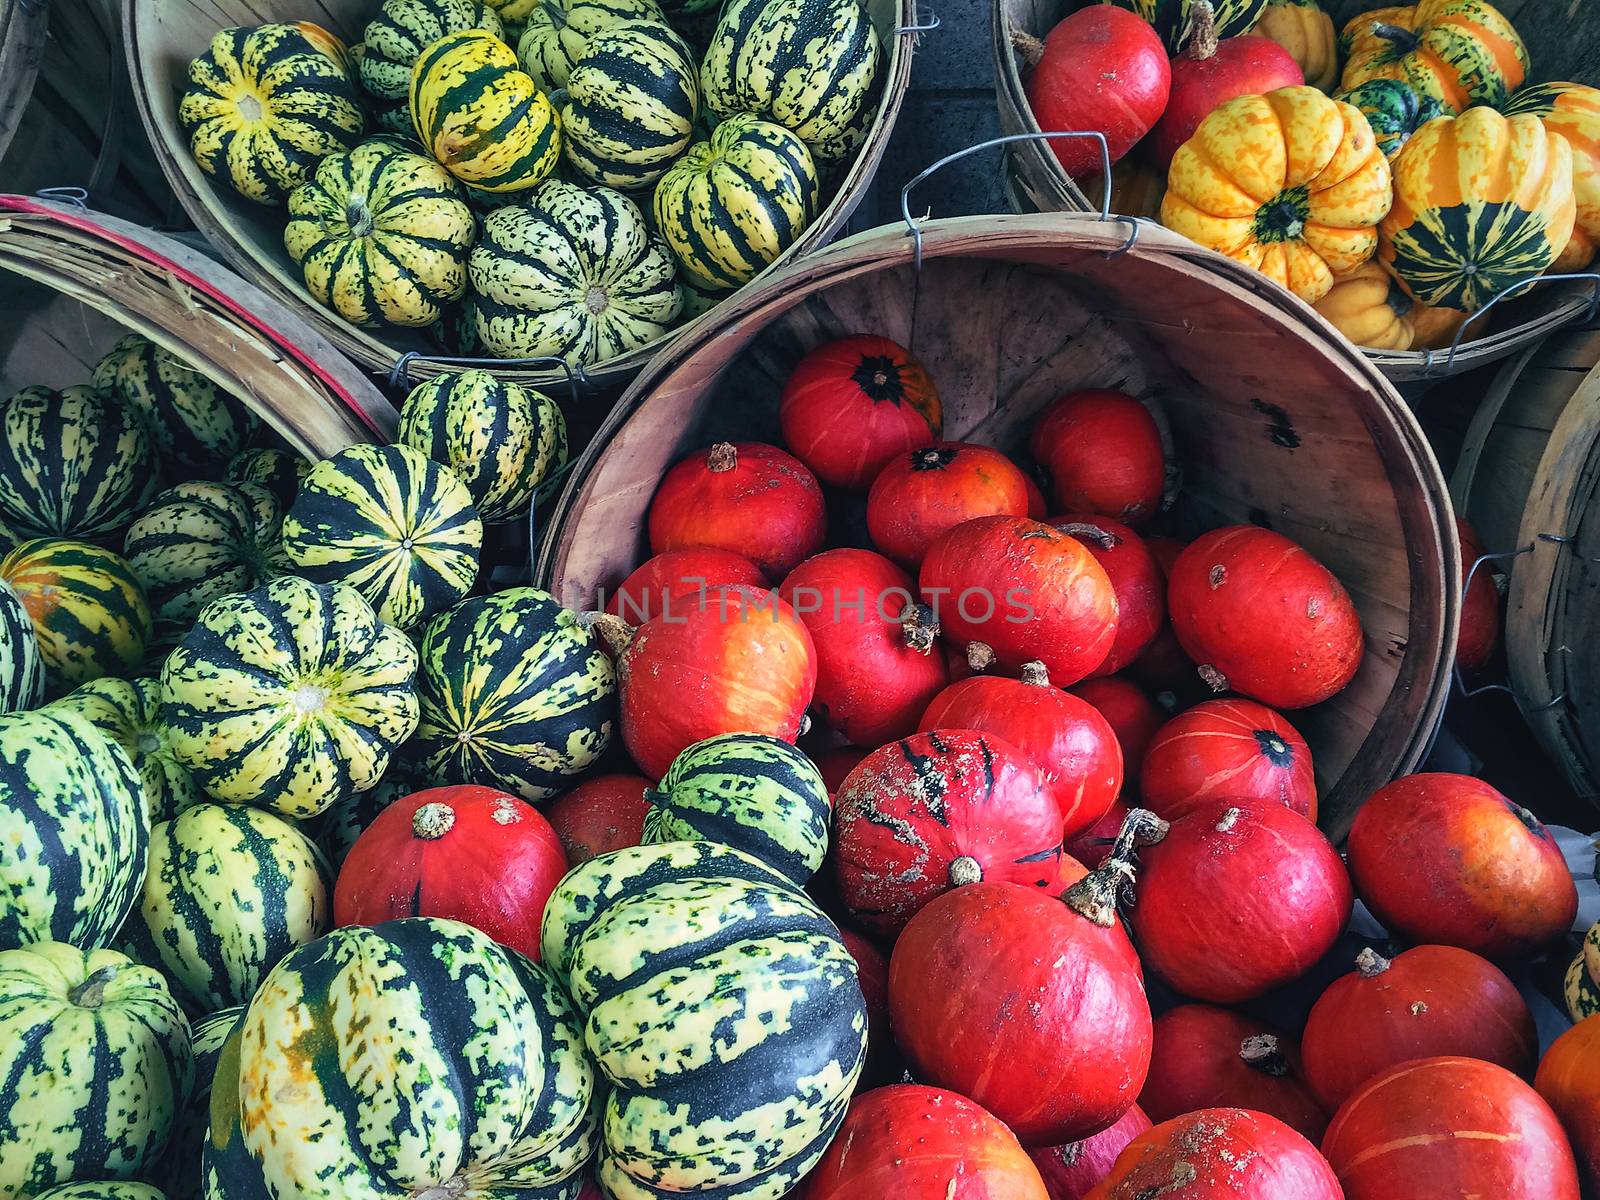 Variety of colorful squashes at the market by anikasalsera